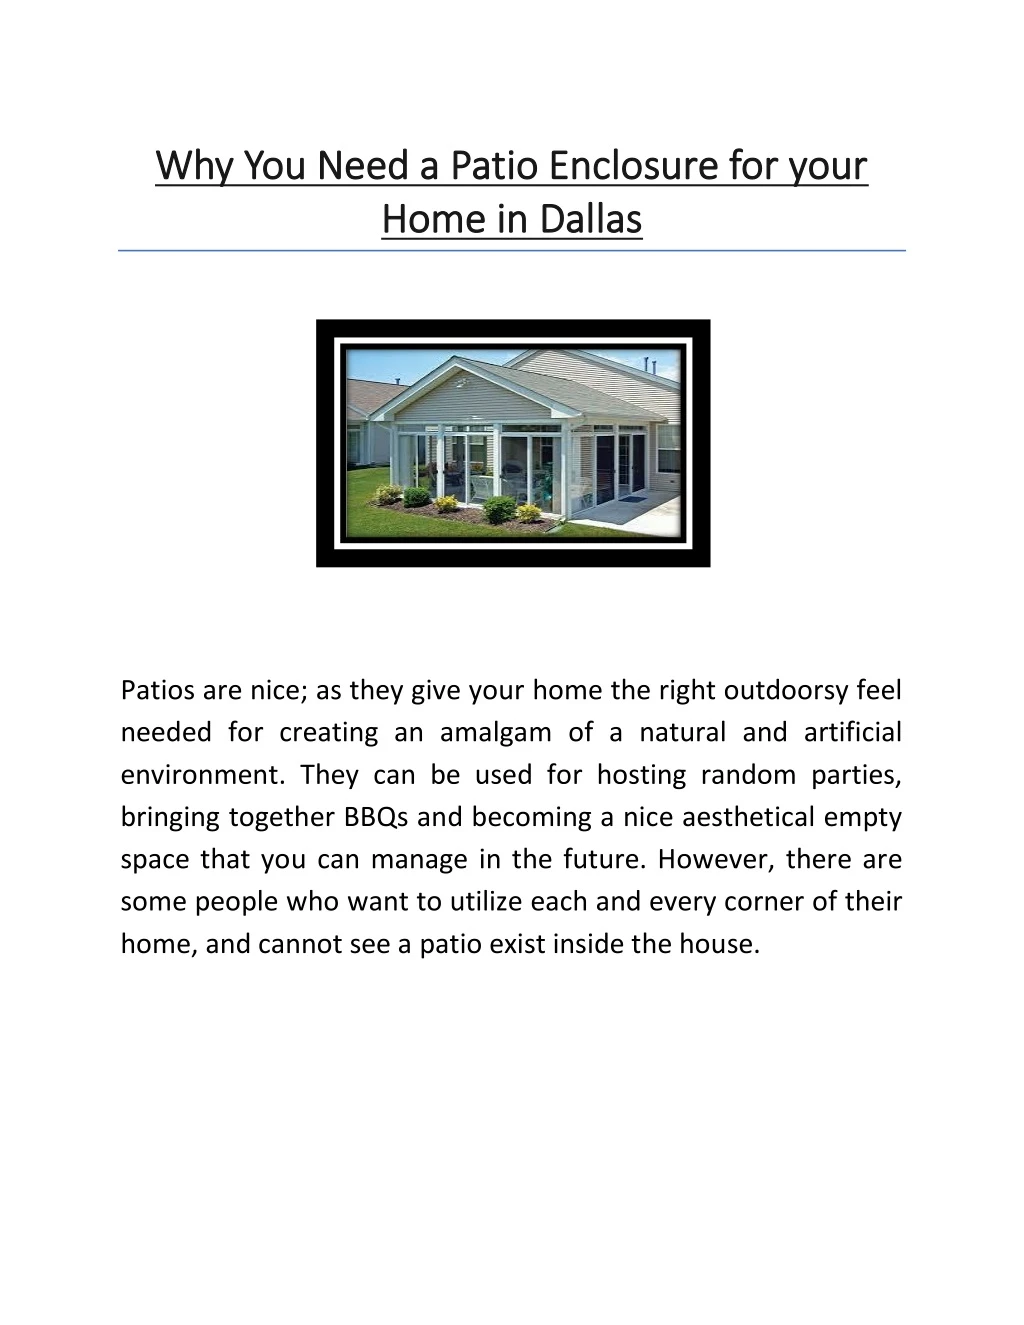 why you need a patio enclosure for your